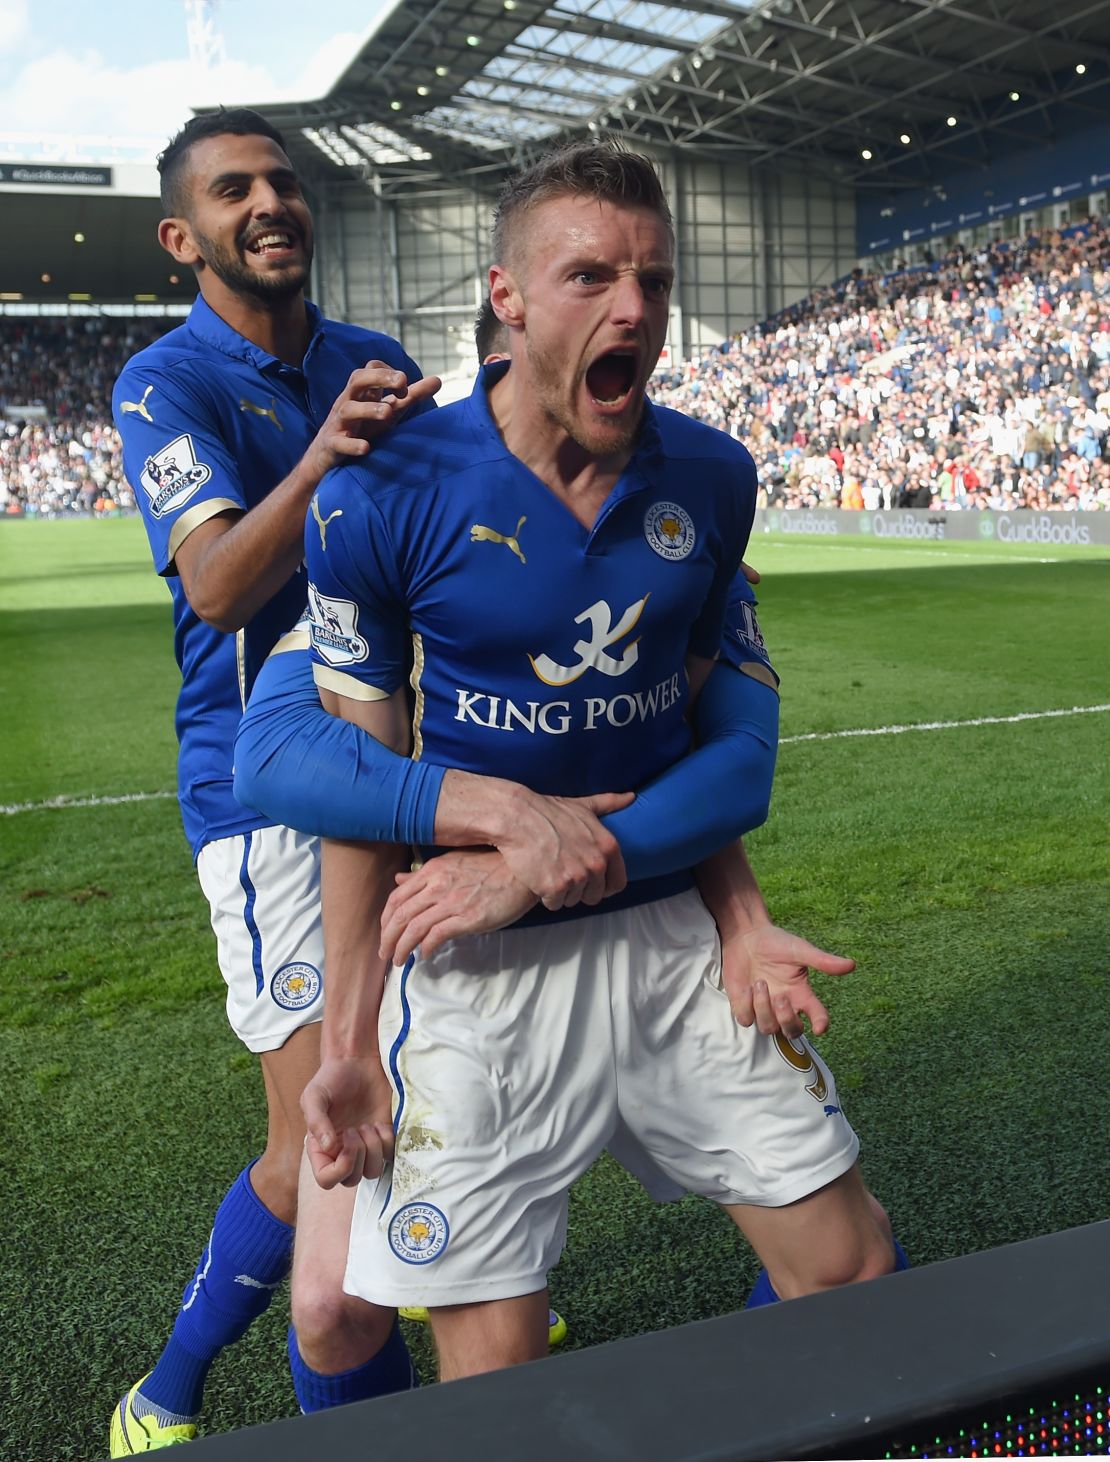 Vardy and Mahrez have been key players in Leicester's charge to the top.